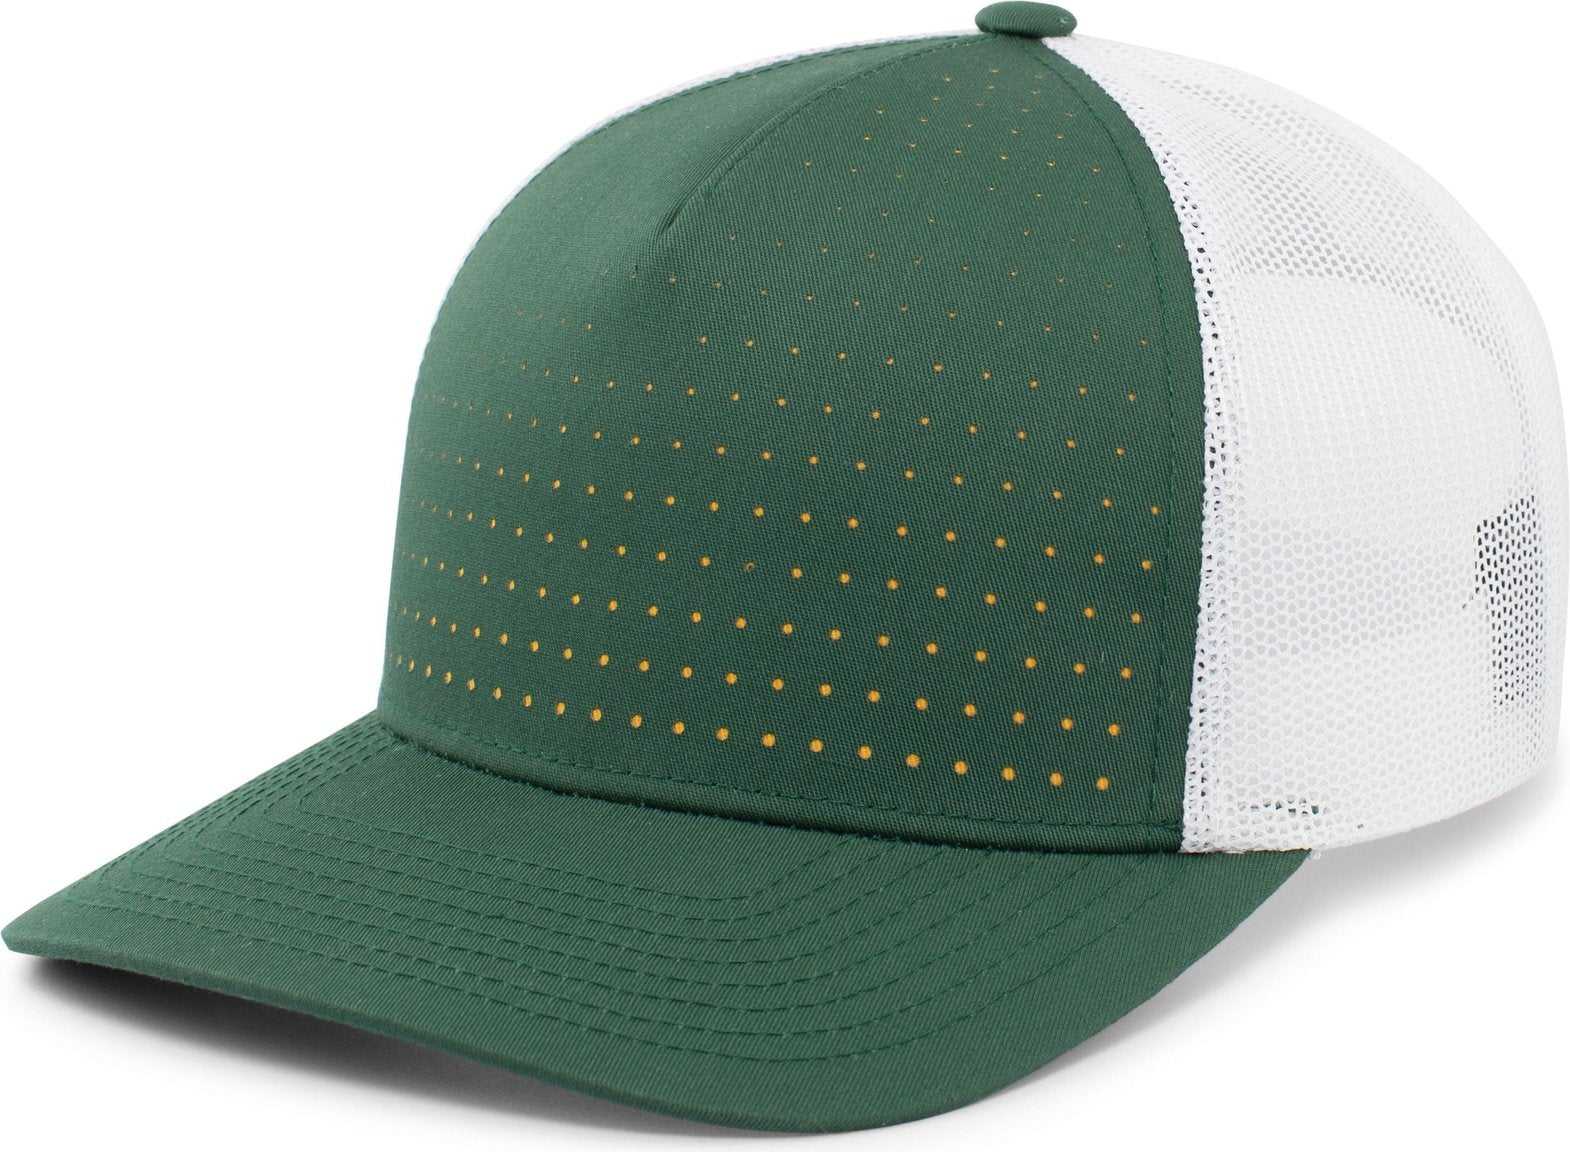 Pacific Headwear 105P Perforated 5 Panel Trucker Snapback Cap - Dark Green White Gold - HIT a Double